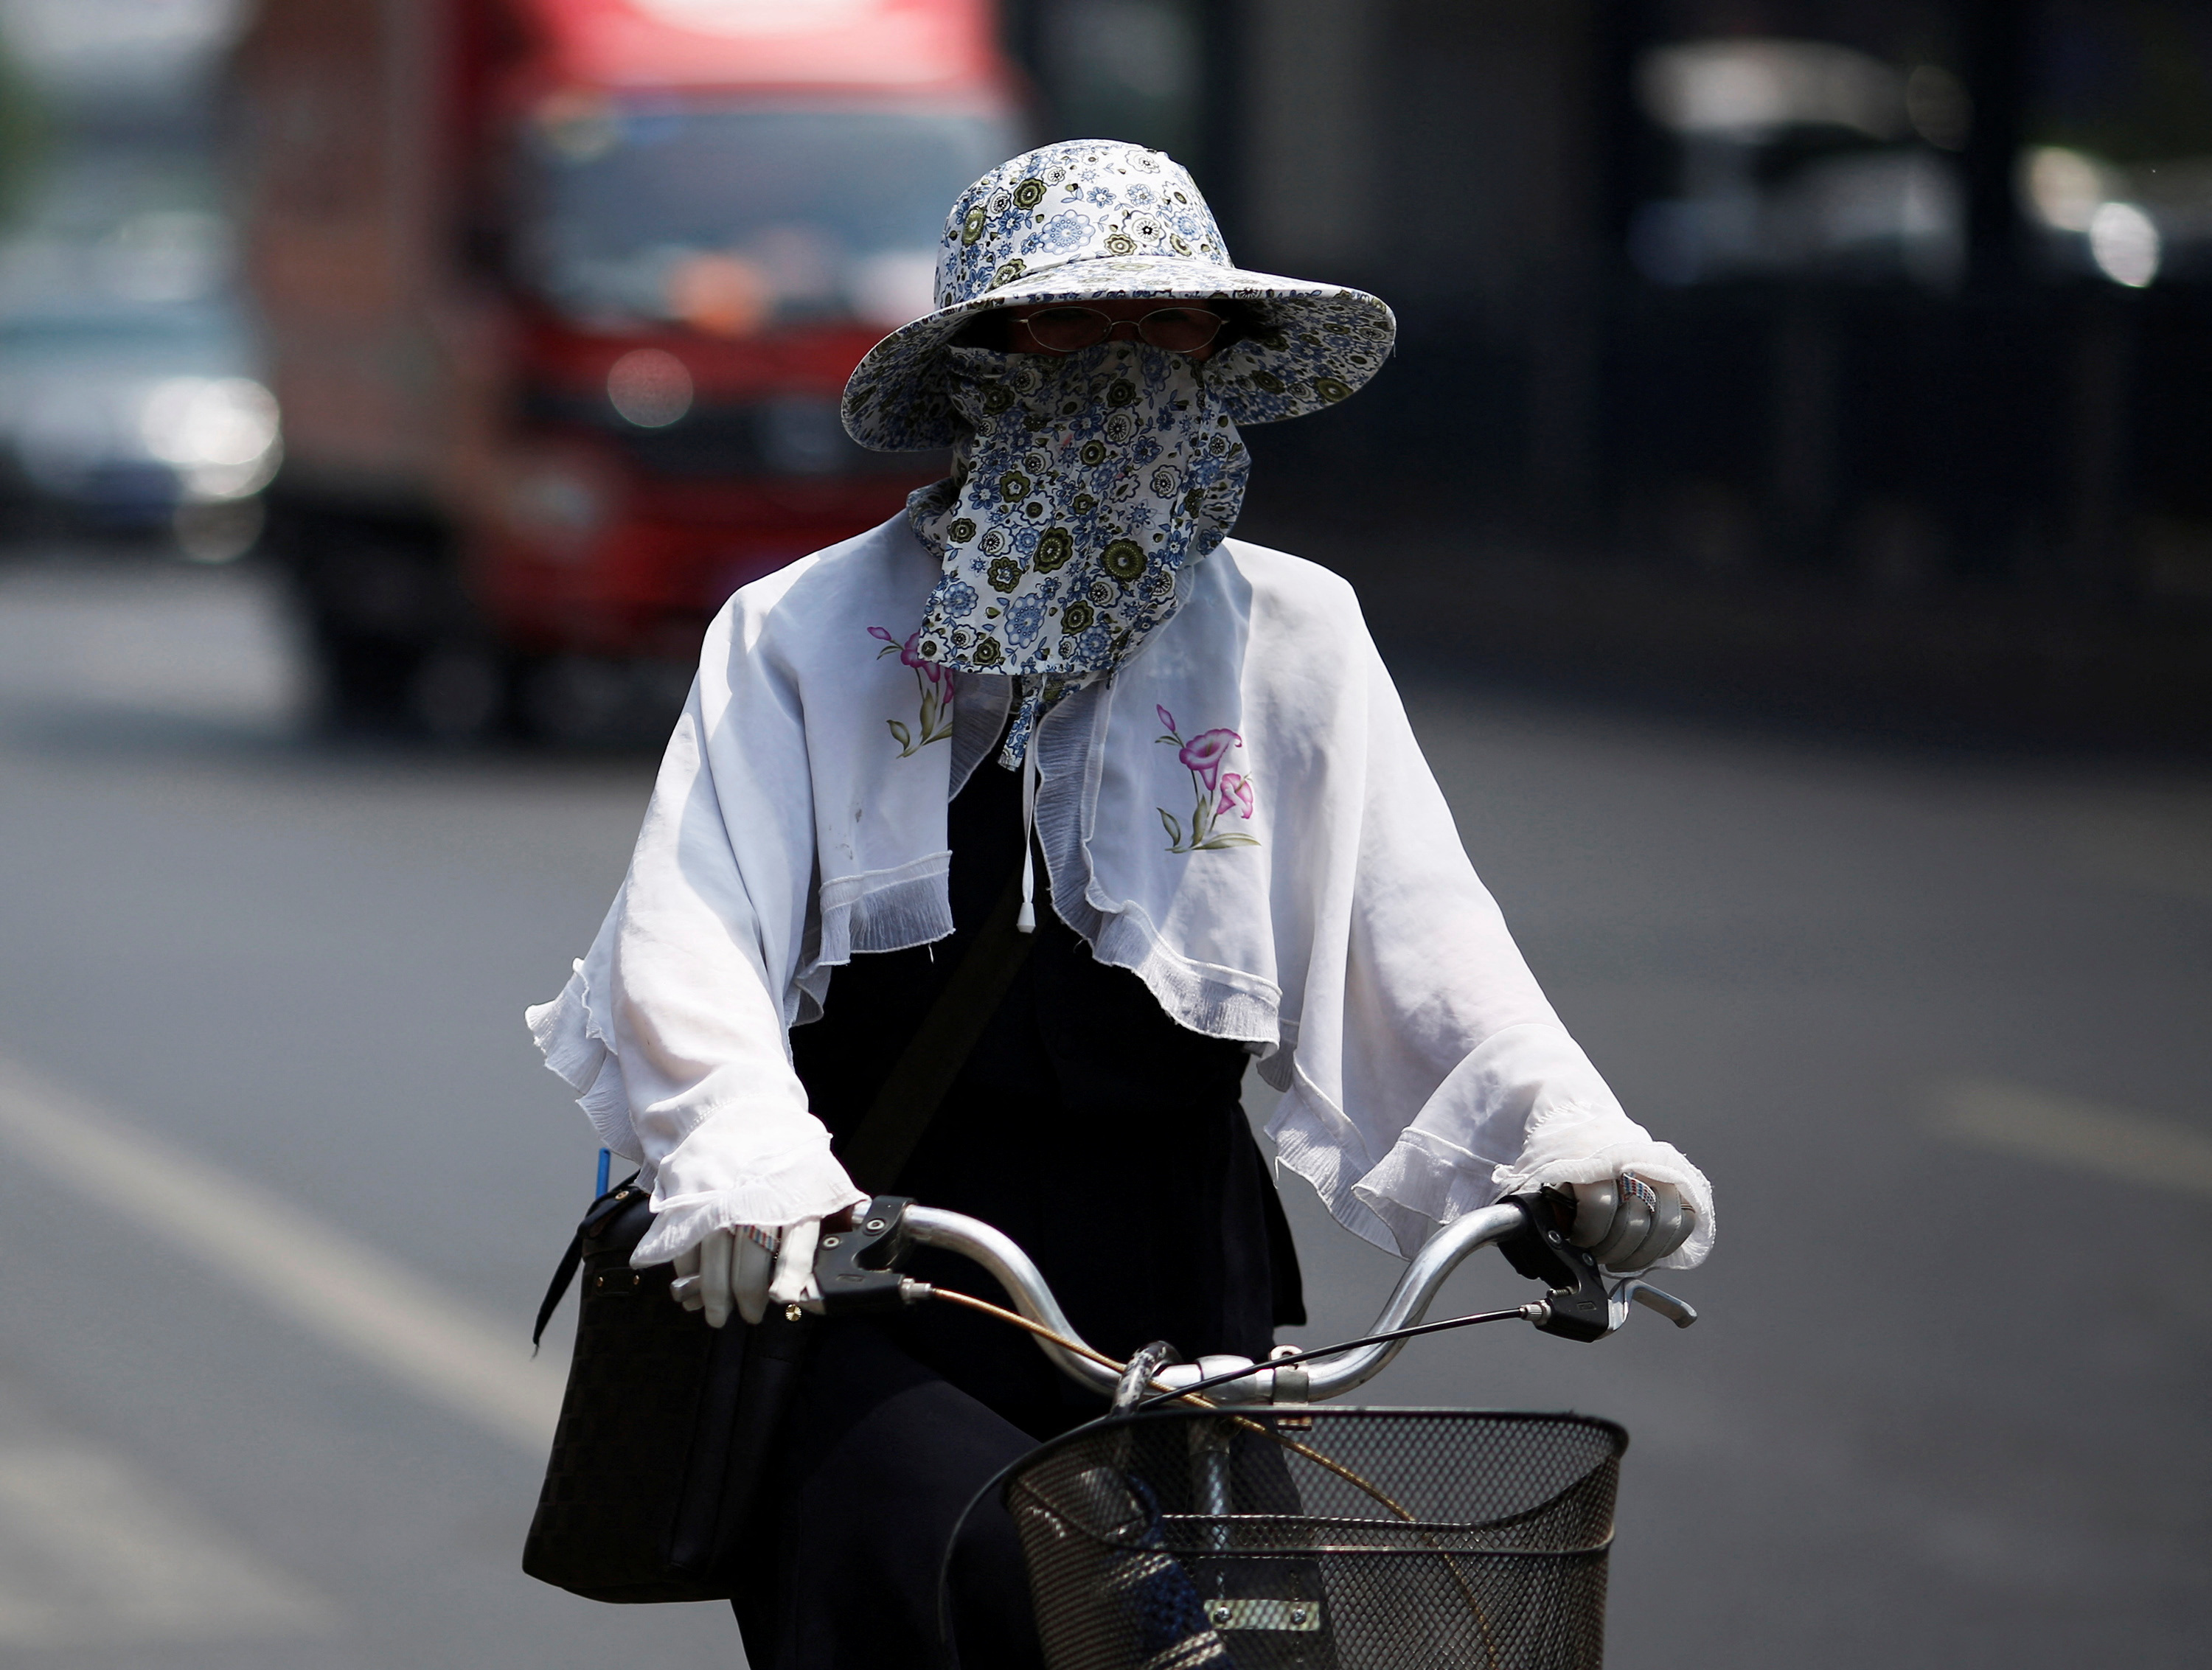 A woman covers herself with a hat and mask as she rides a bicycle in Beijing